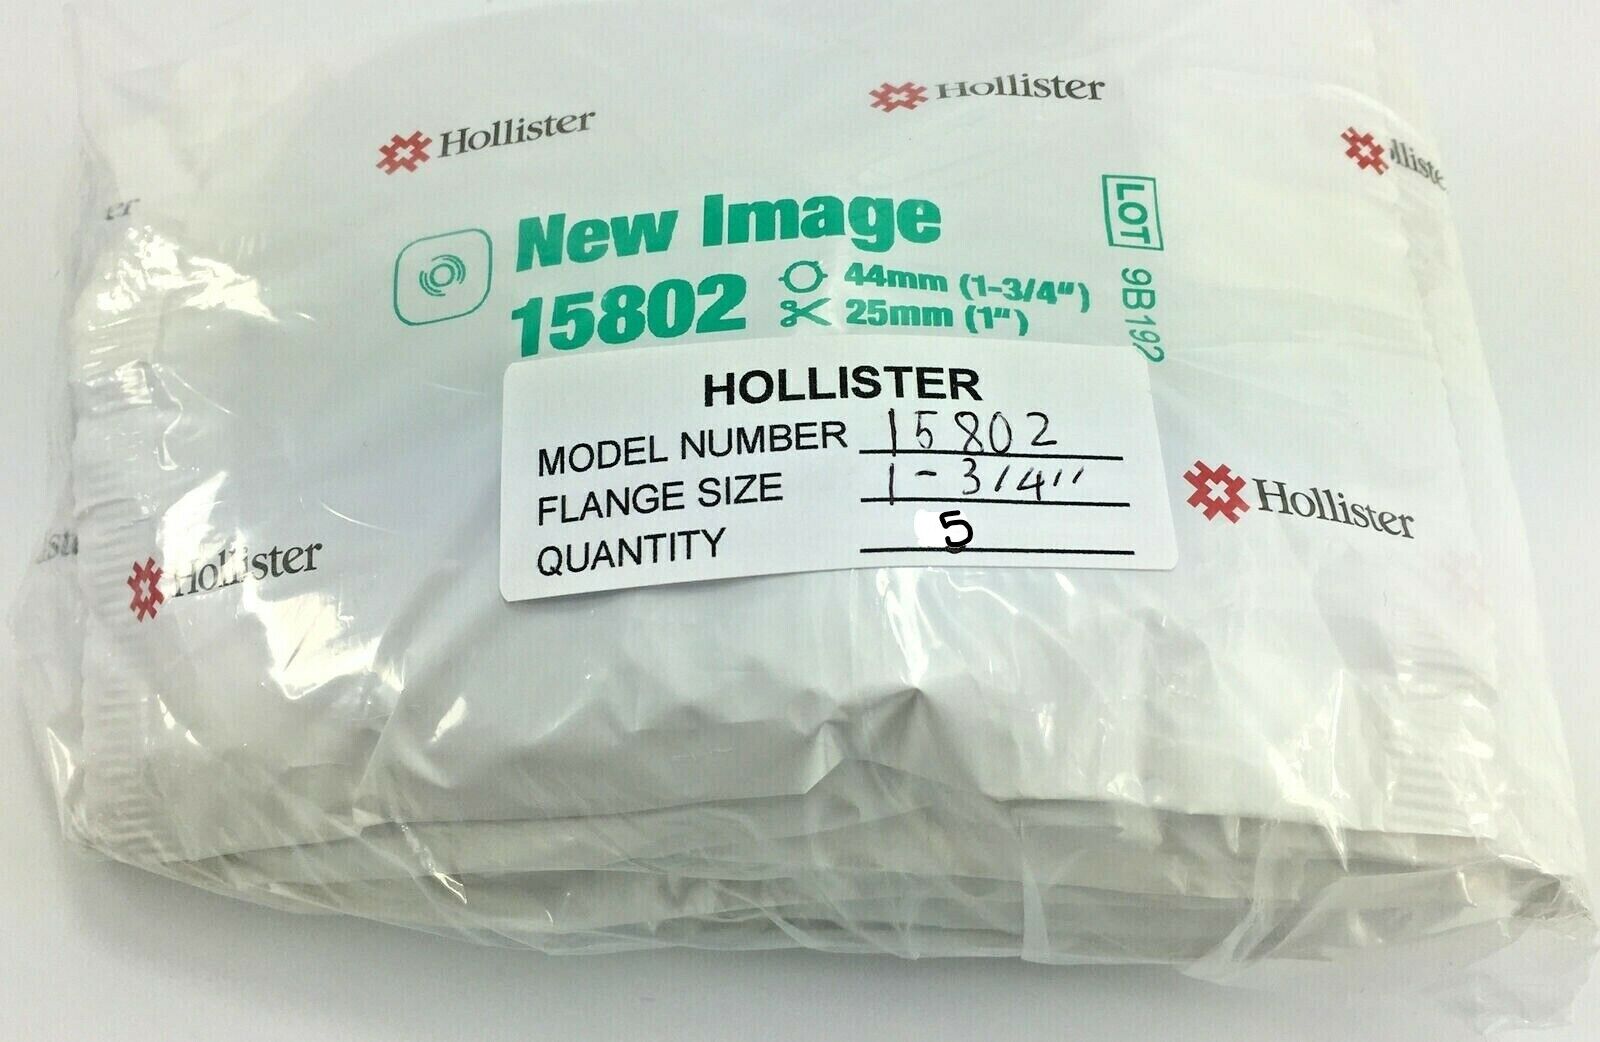 5 Hollister 15802 Cut-to-fit Skin Barriers 1-3/4" Flange Usa In Bag